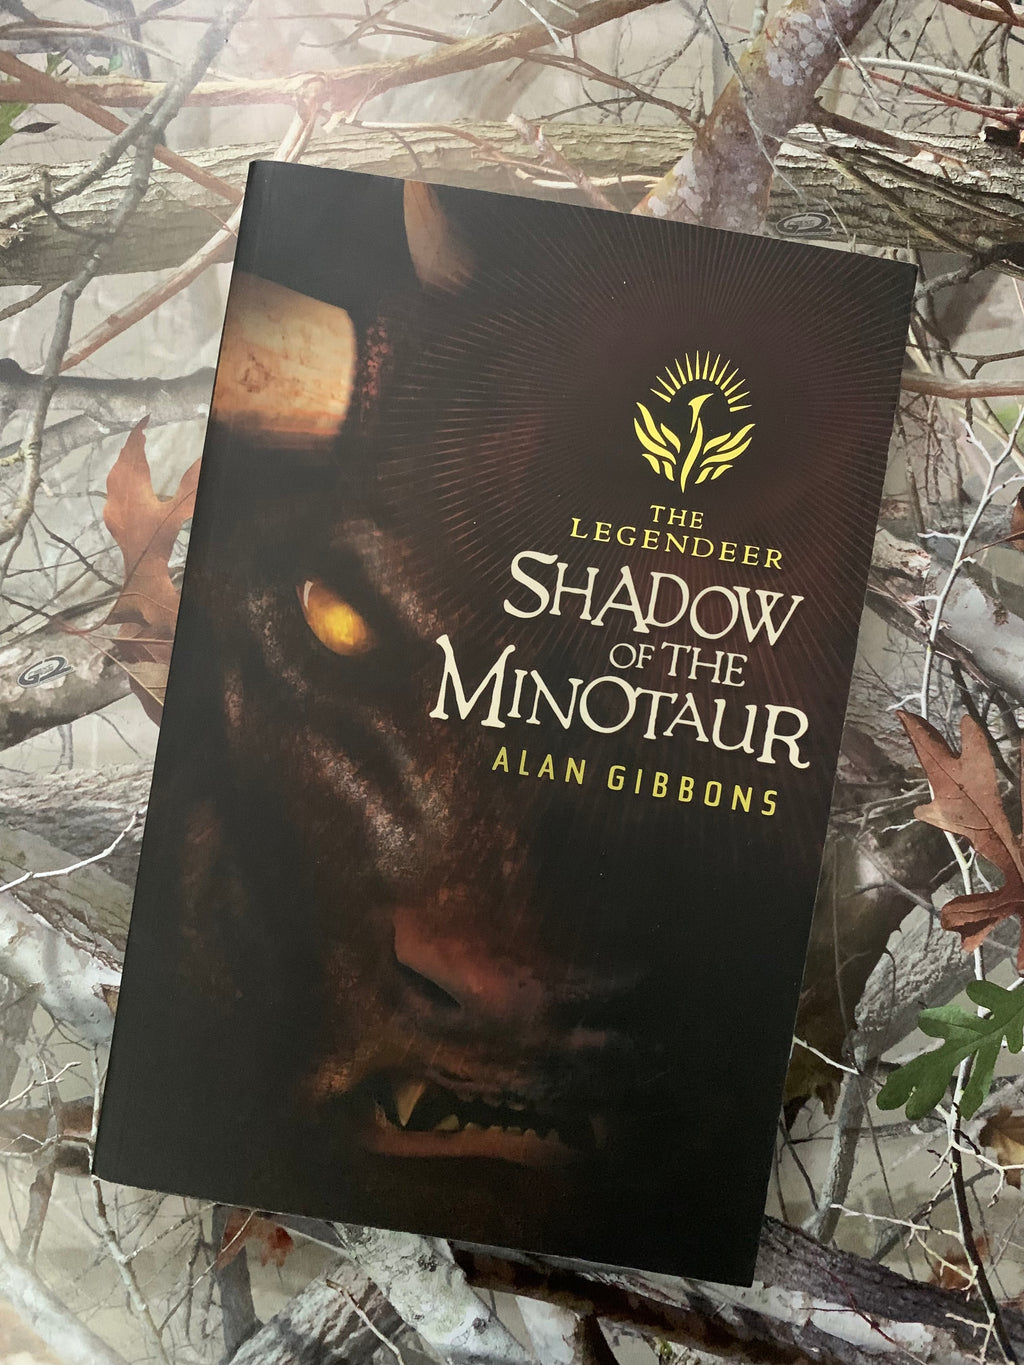 The Legendeer: Shadow of the Minotaur- By Alan Gibbons